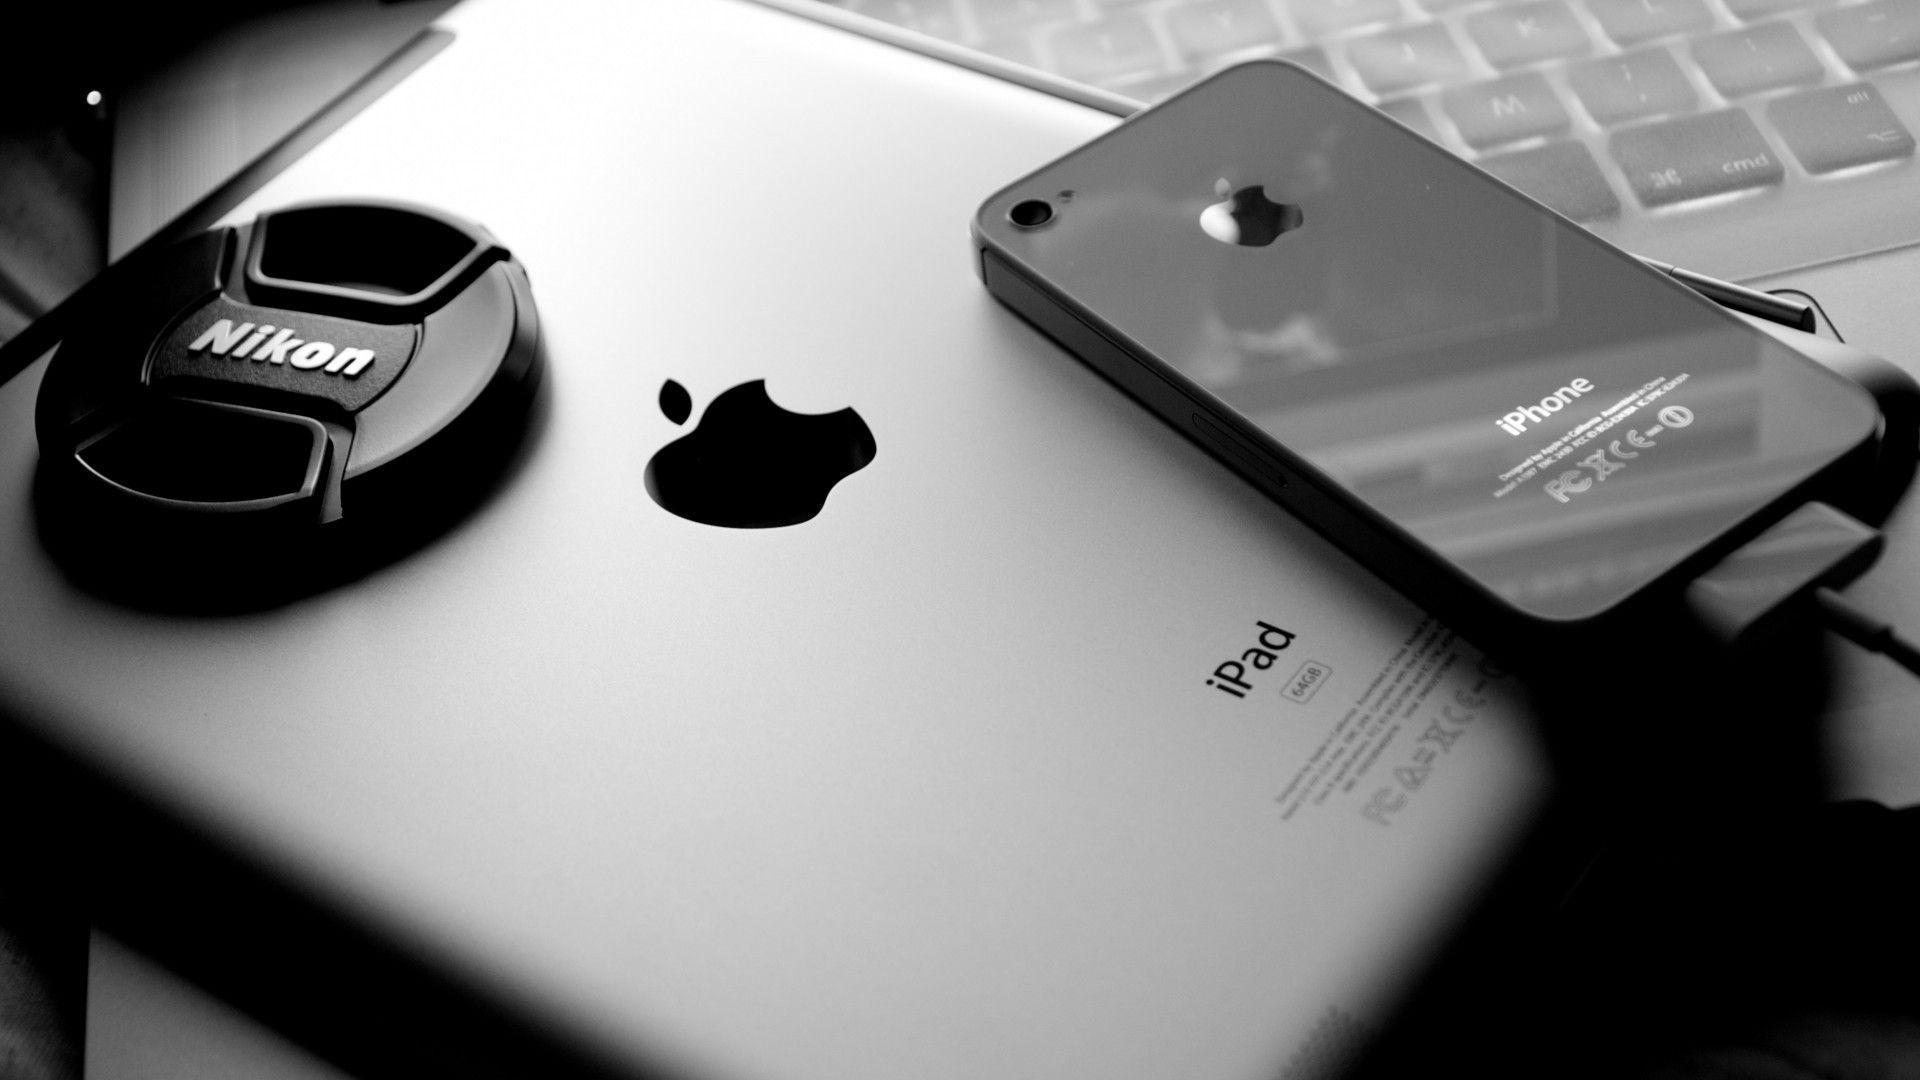 Wallpapers For > Iphone 4 Wallpapers Black And White